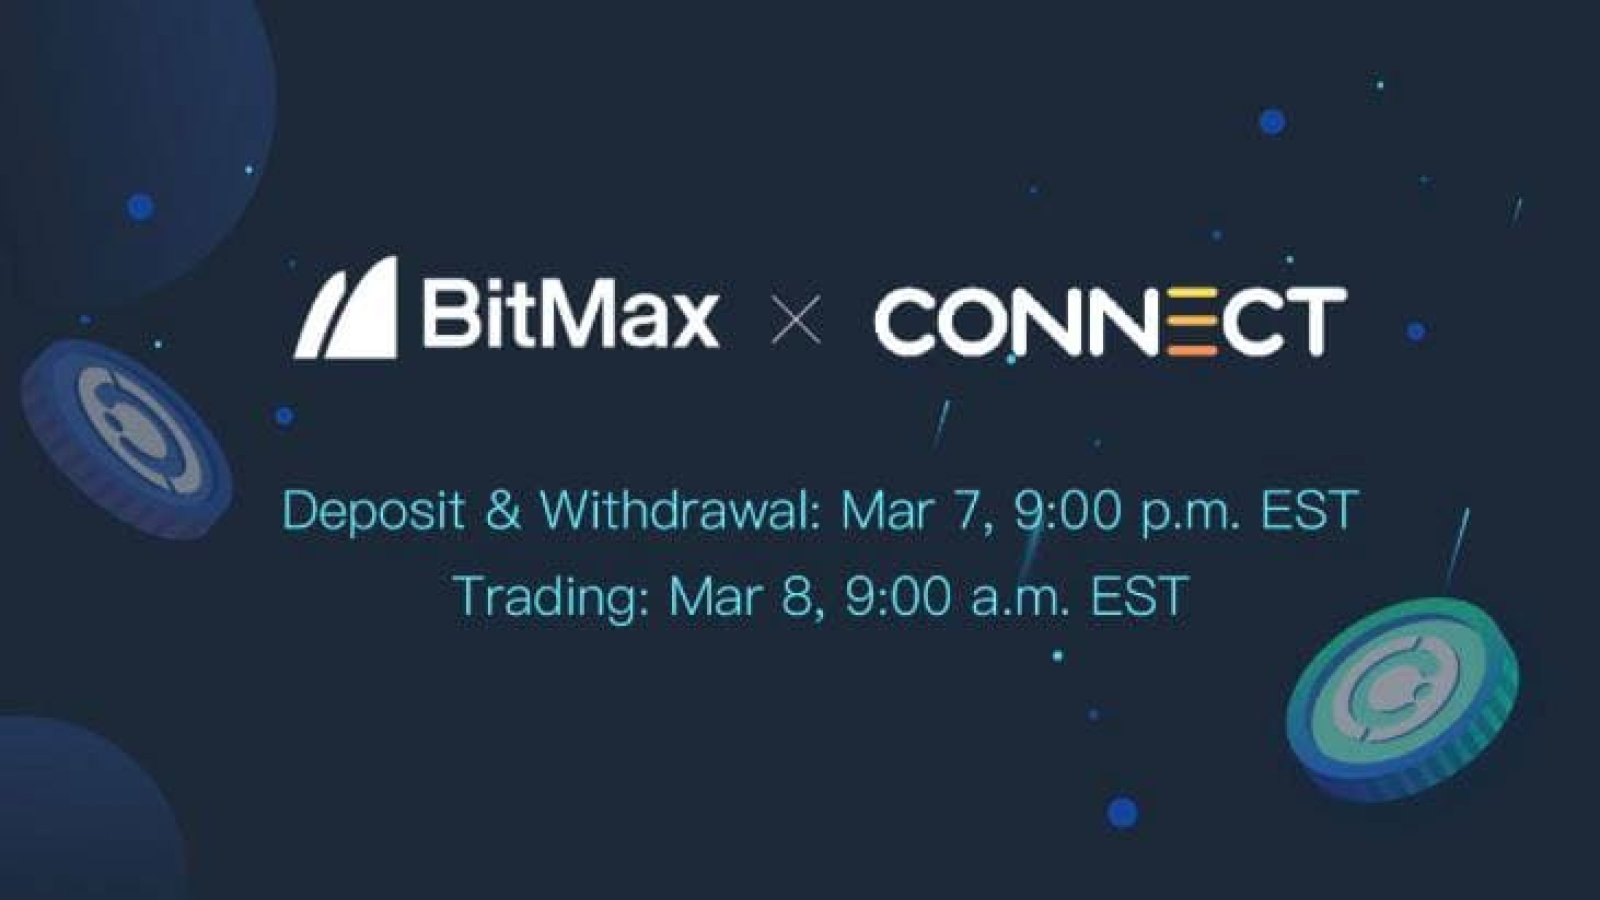 Connect Financial to List CNFI Tokens With BitMax